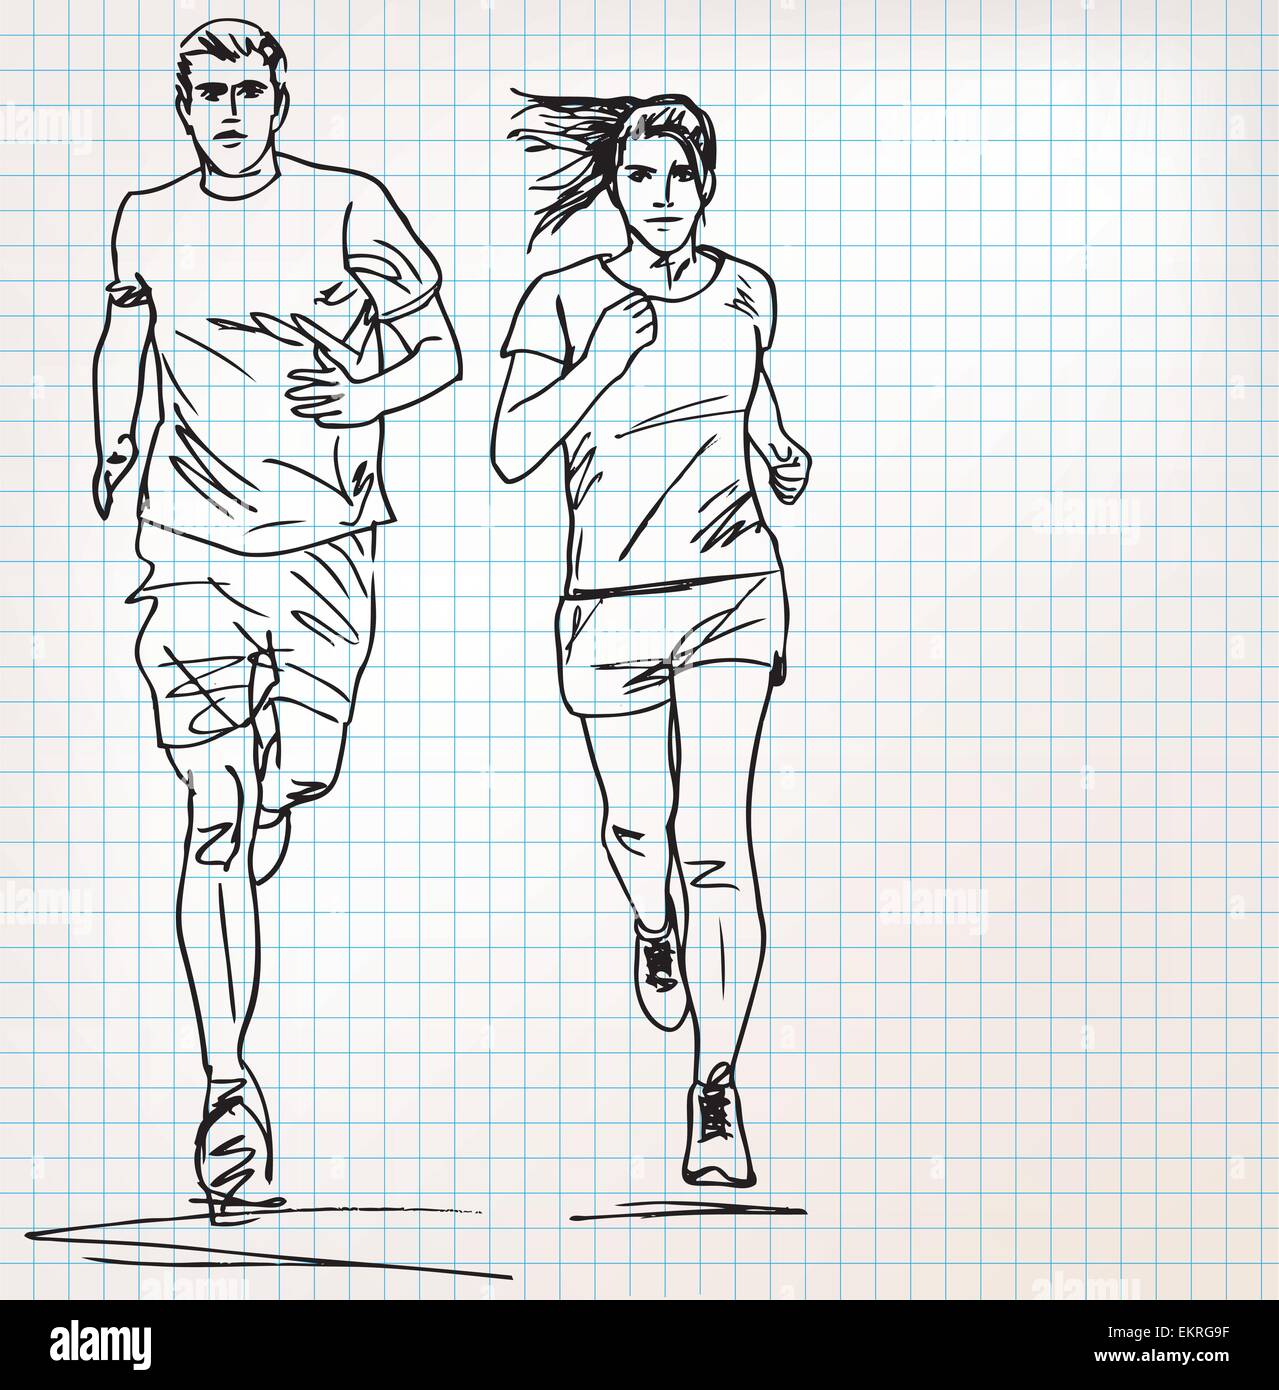 Female Athlethic Runner in Abstract Sketch Style  Vectorjunky  Free  Vectors Icons Logos and More